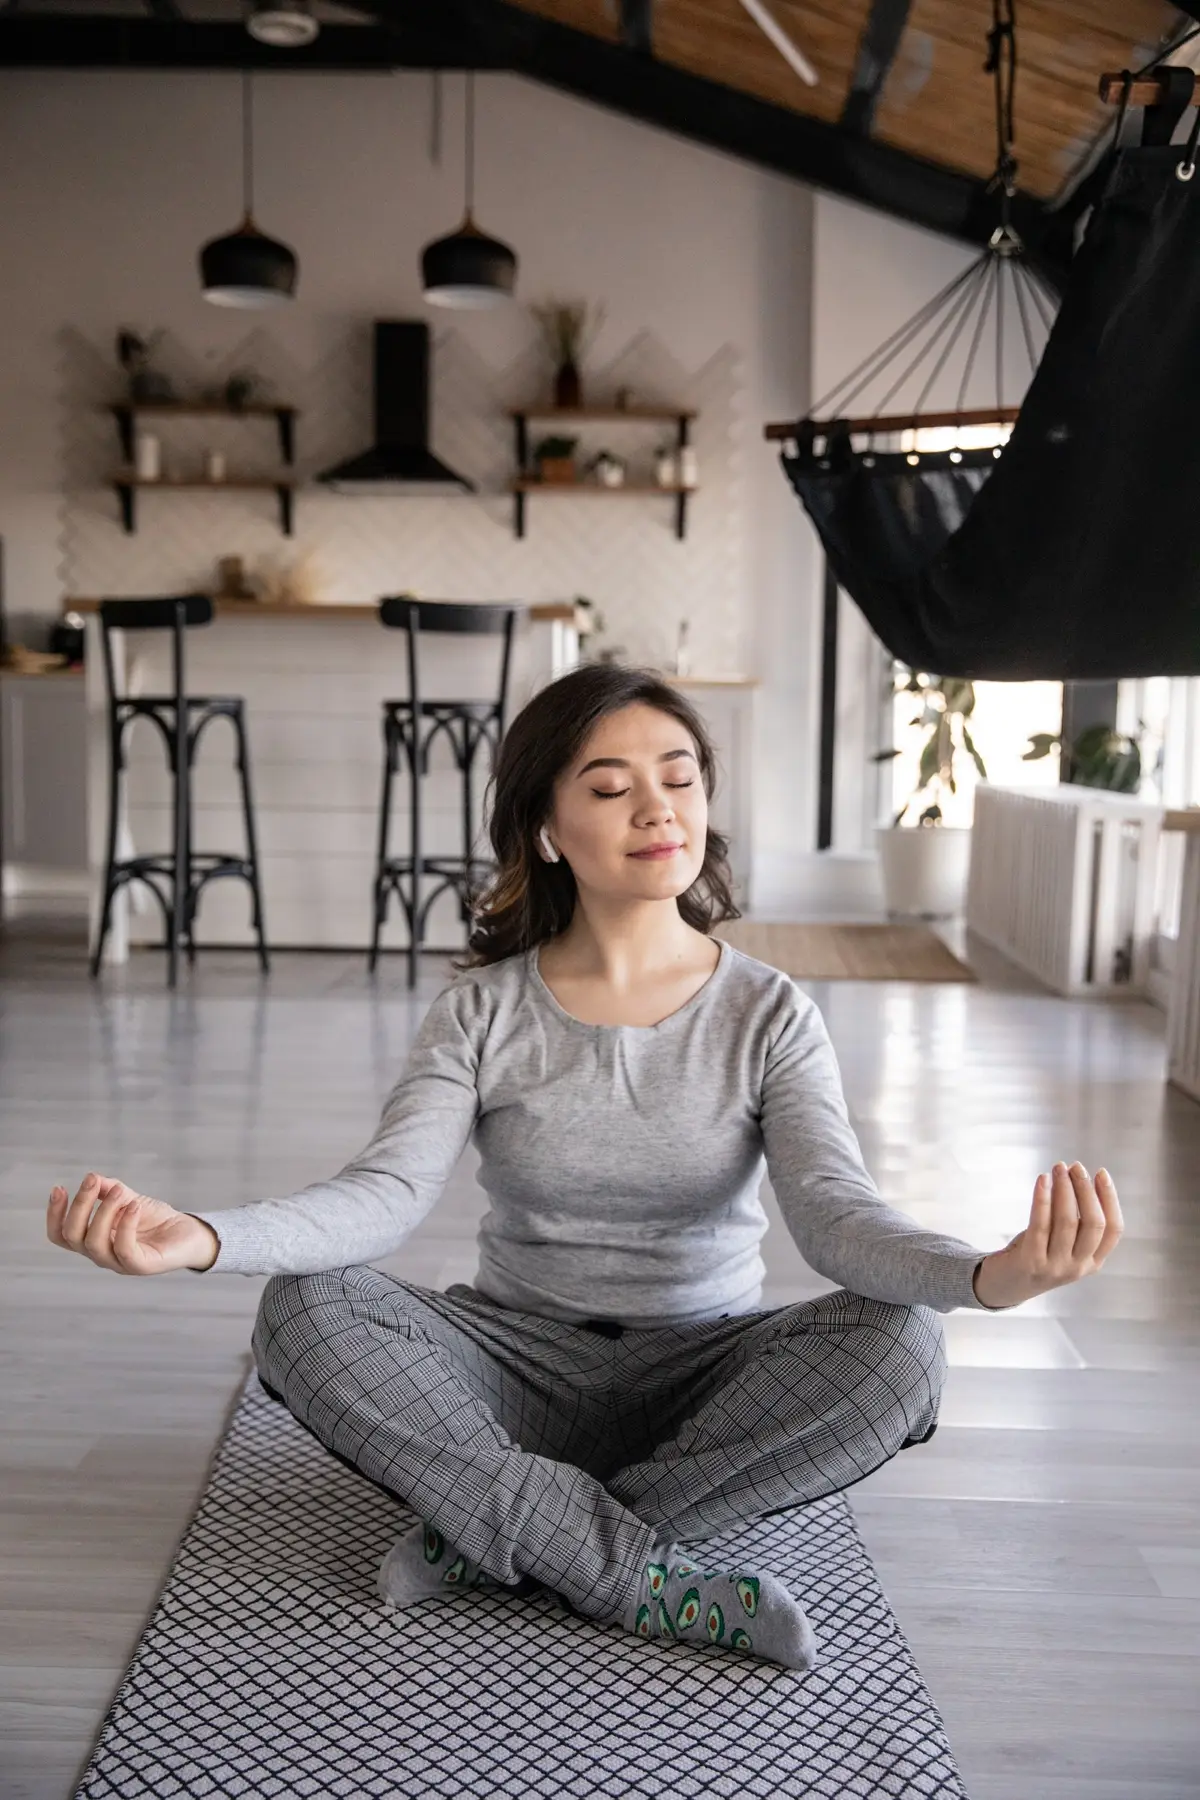 what are the benefits of meditation and mindfulness